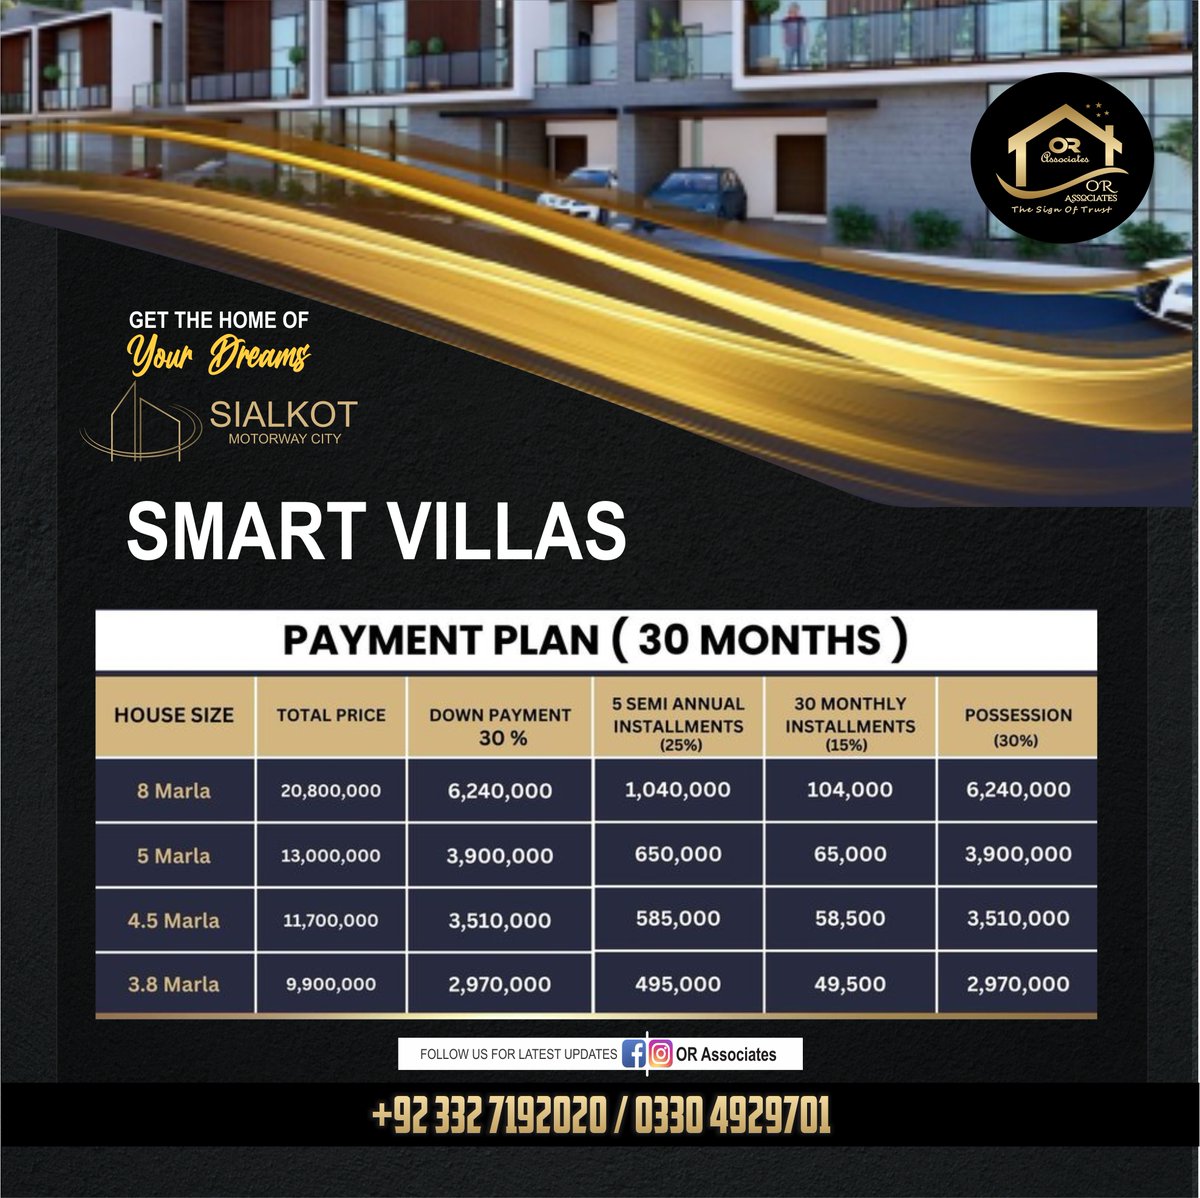 Sialkot Motorway City is now providing a unique and convenient Smart Villas These villas allow residents to enjoy a luxurious and modern lifestyle. Visit Our Office: Office 13, 113 Aziz Shaheed Road, Kent Mall, Sialkot, Pakistan Contact Us: +92 332 7192020 +92 330-4929701